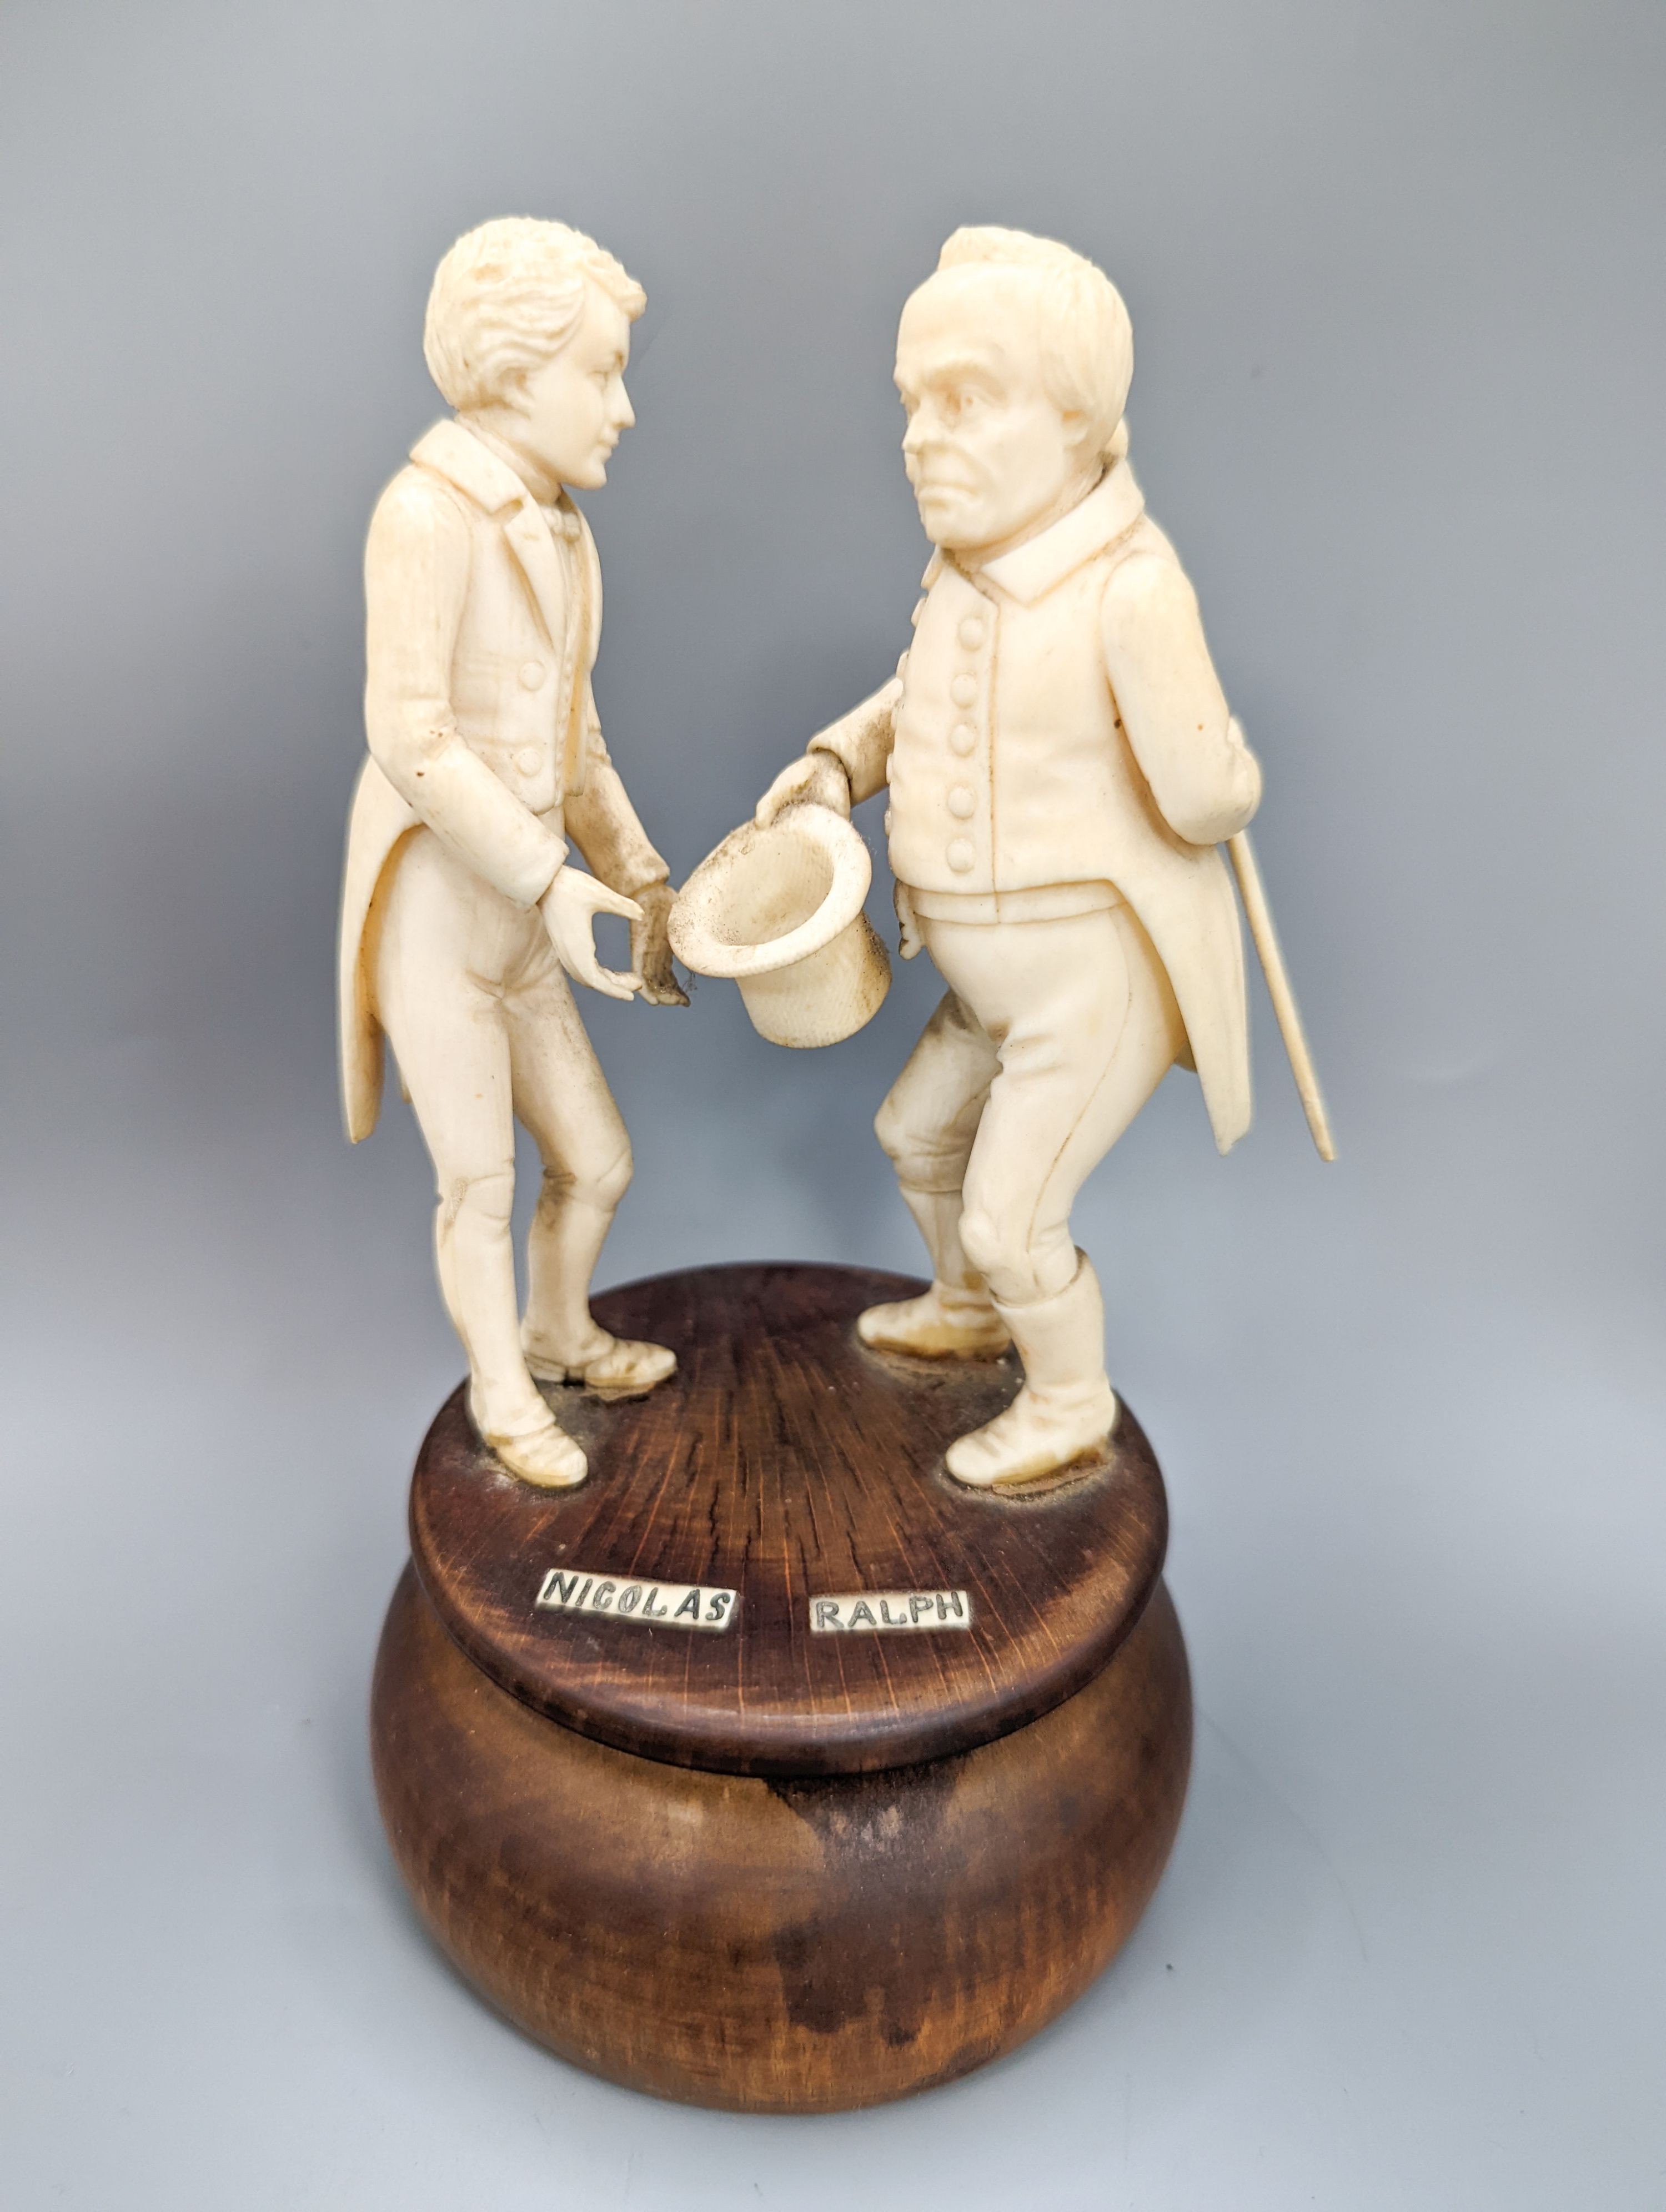 Three South German ivory Dickens characters groups or figures, early 20th century, tallest 15.5cm